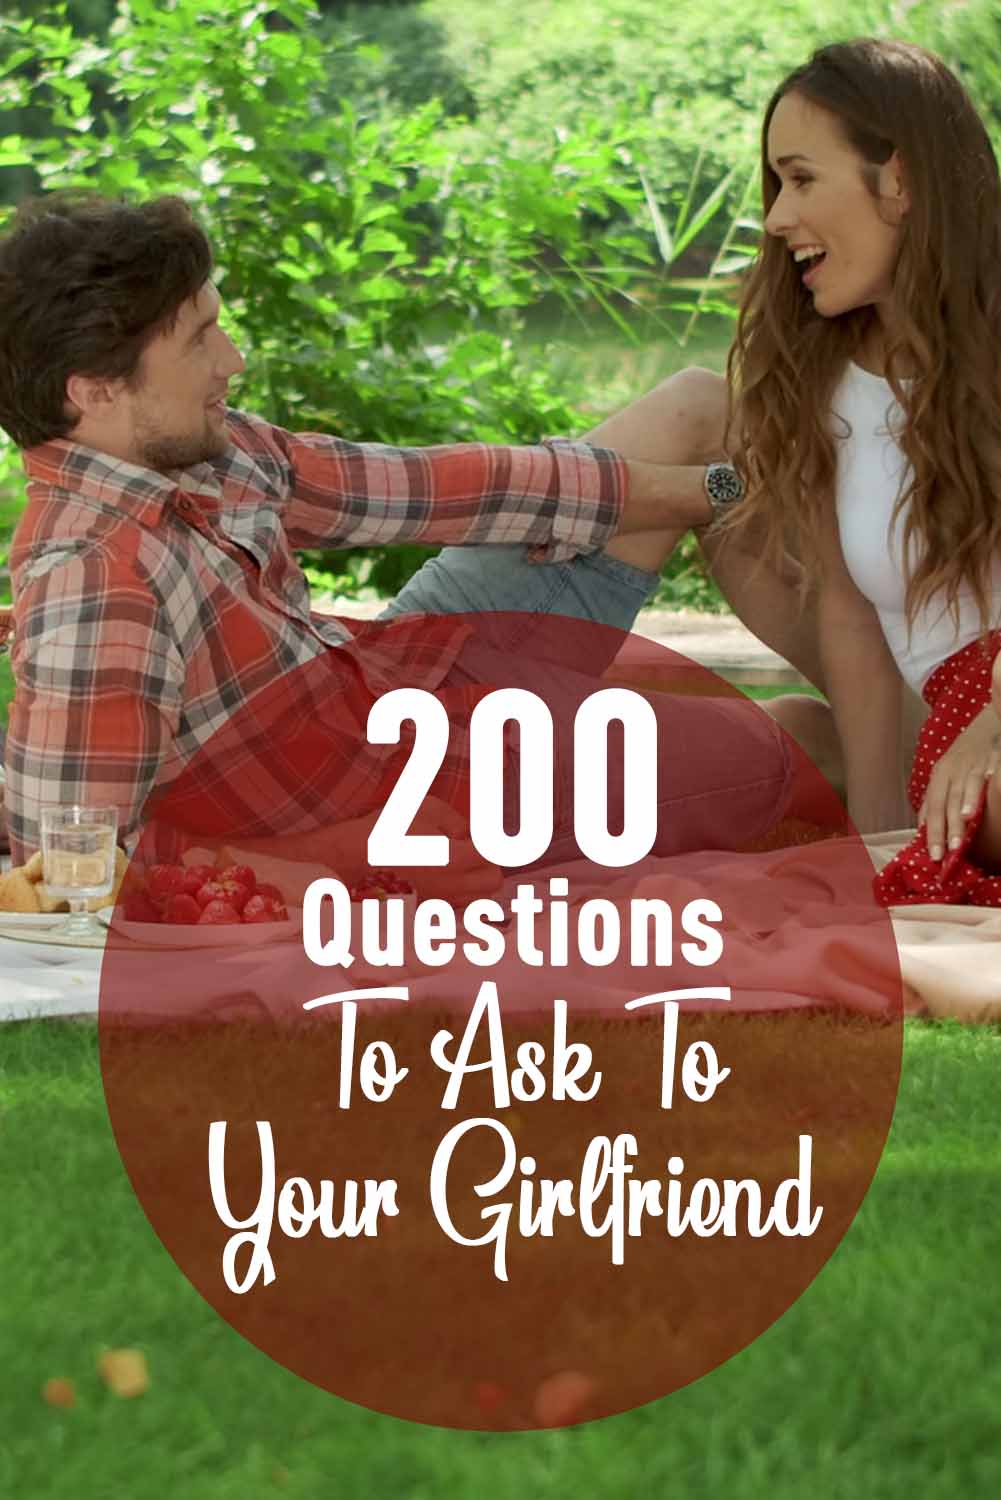 200+ Questions to Ask your Girlfriend (From Cute to Dirty)